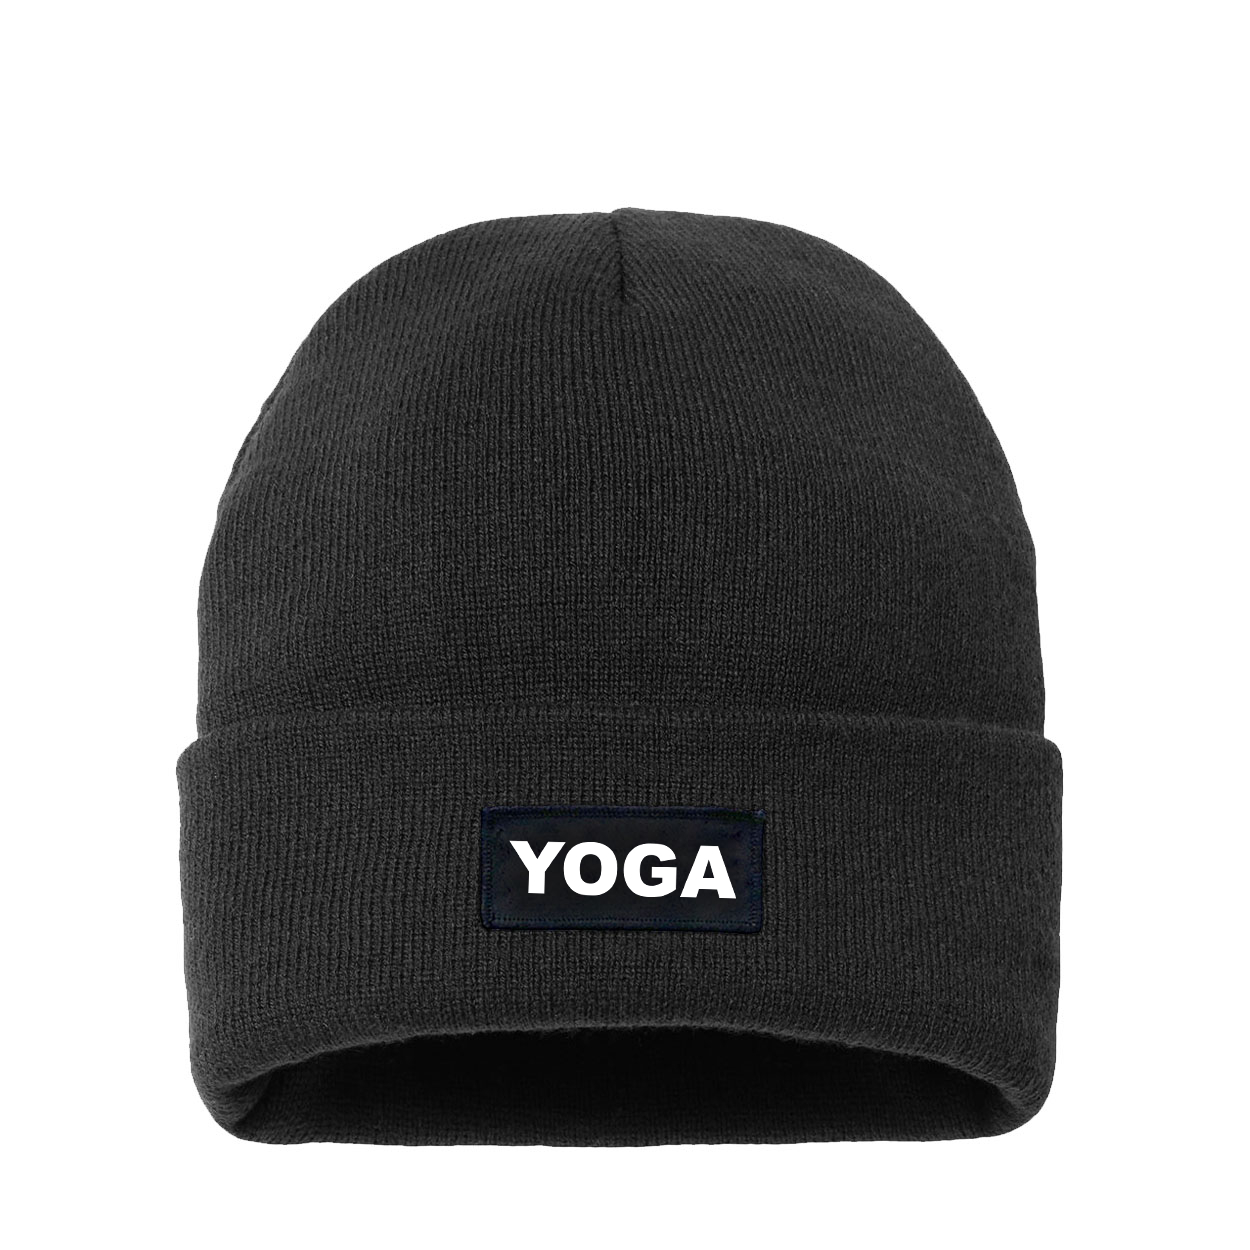 Yoga Brand Logo Night Out Woven Patch Night Out Sherpa Lined Cuffed Beanie Black